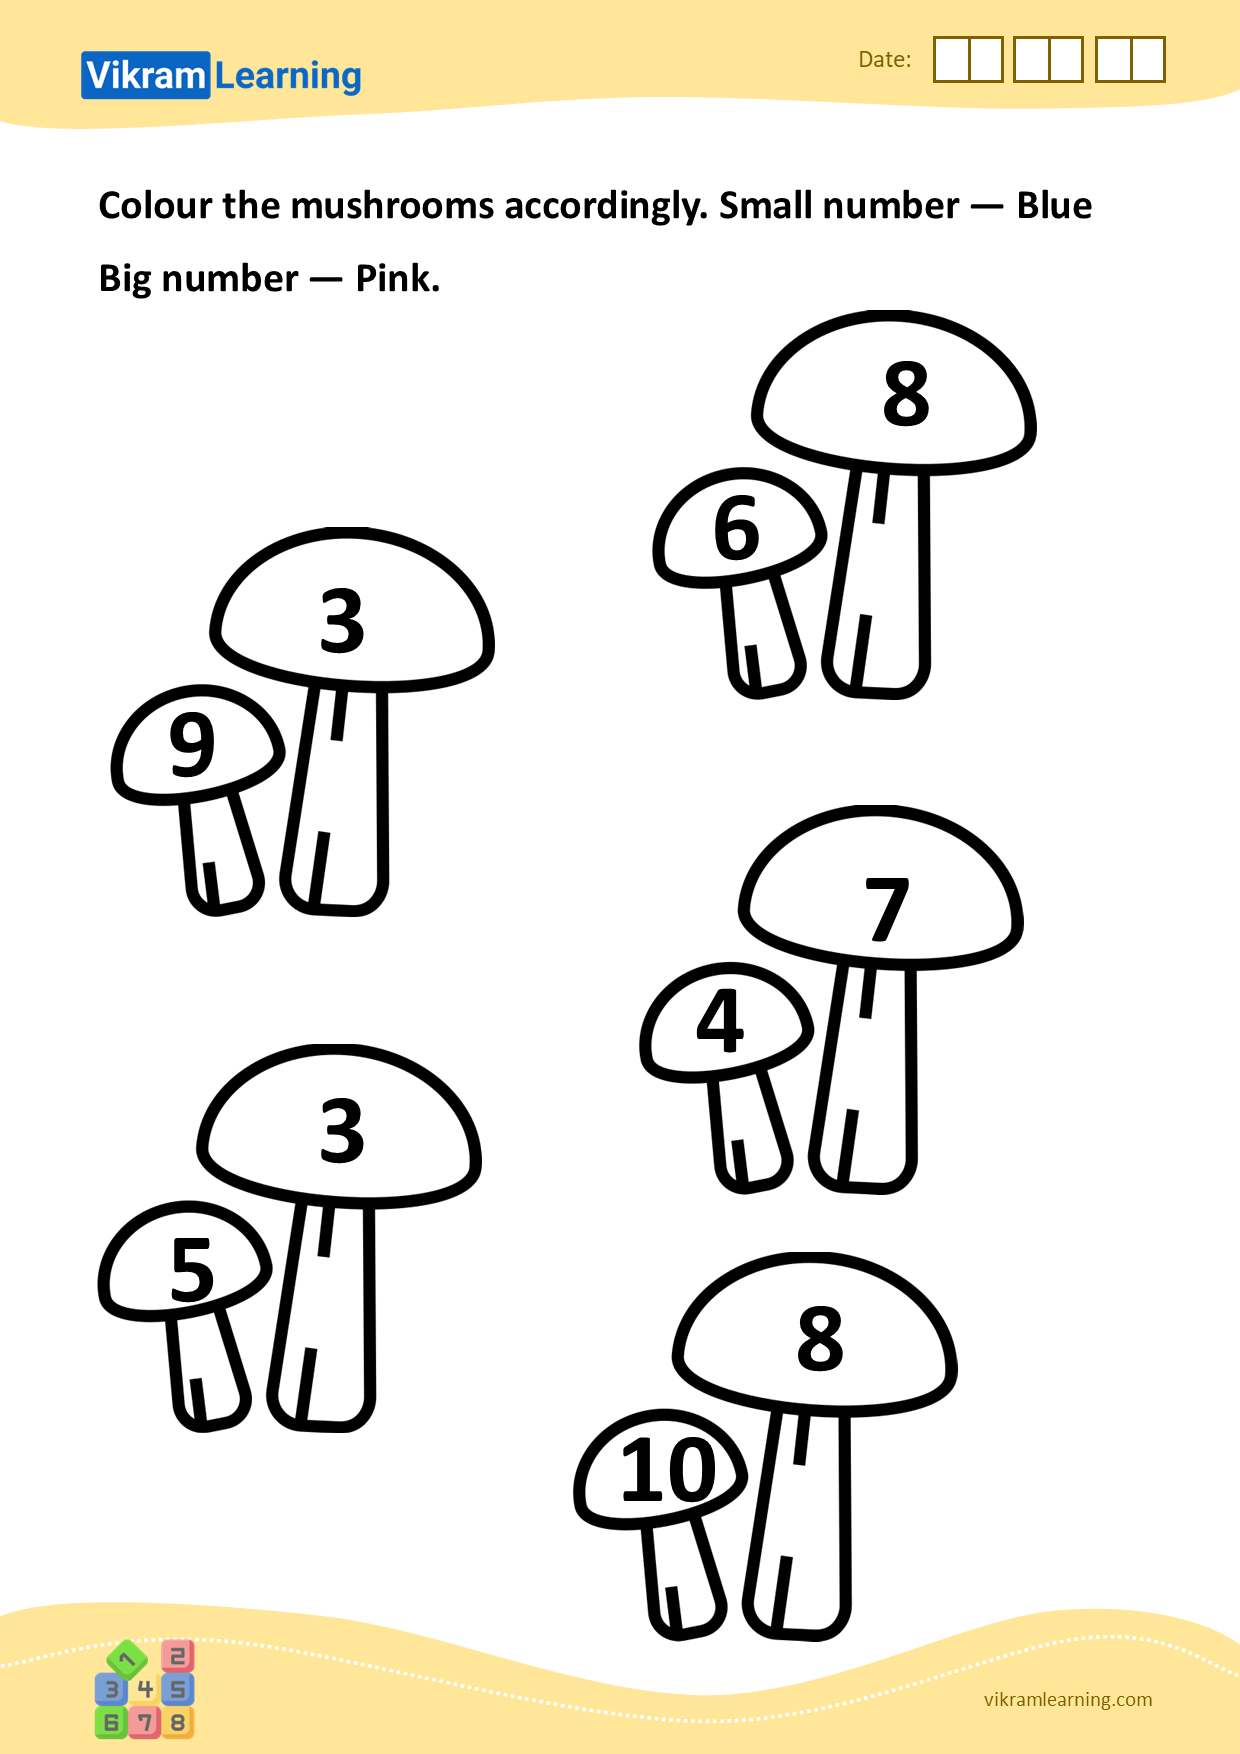 Download colour the mushrooms accordingly. small number — blue
big number — pink. worksheets